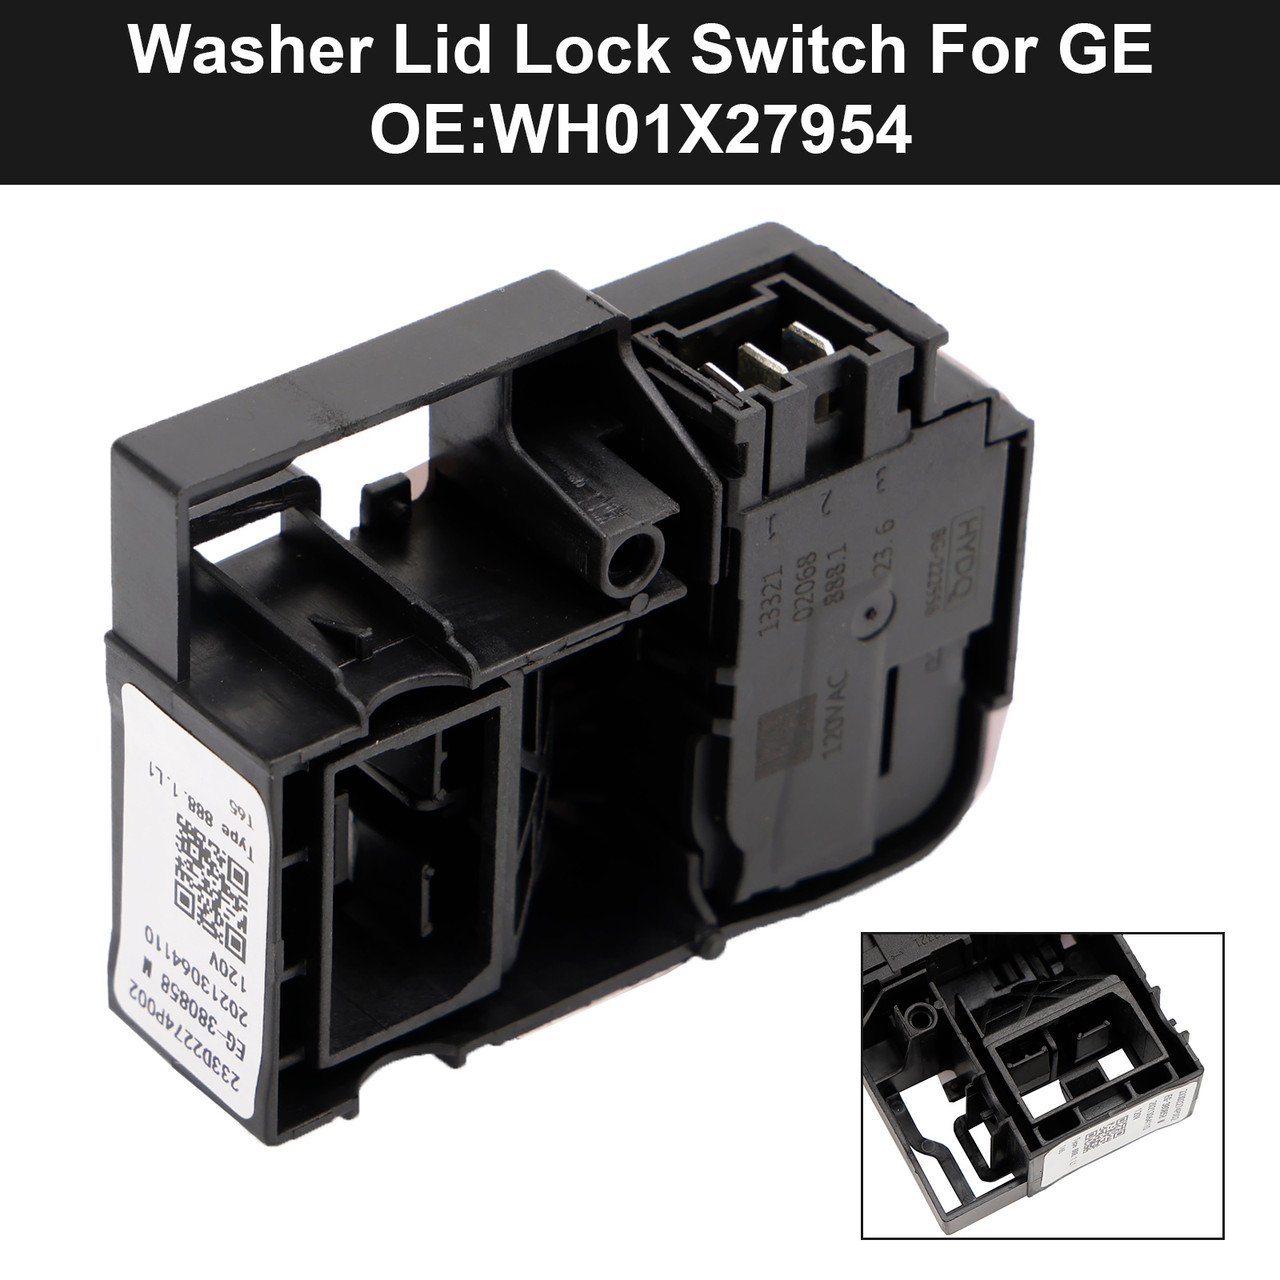 Washer Lid Lock Switch WH01X27954 Fit For GE Hotpoint Washing Maching